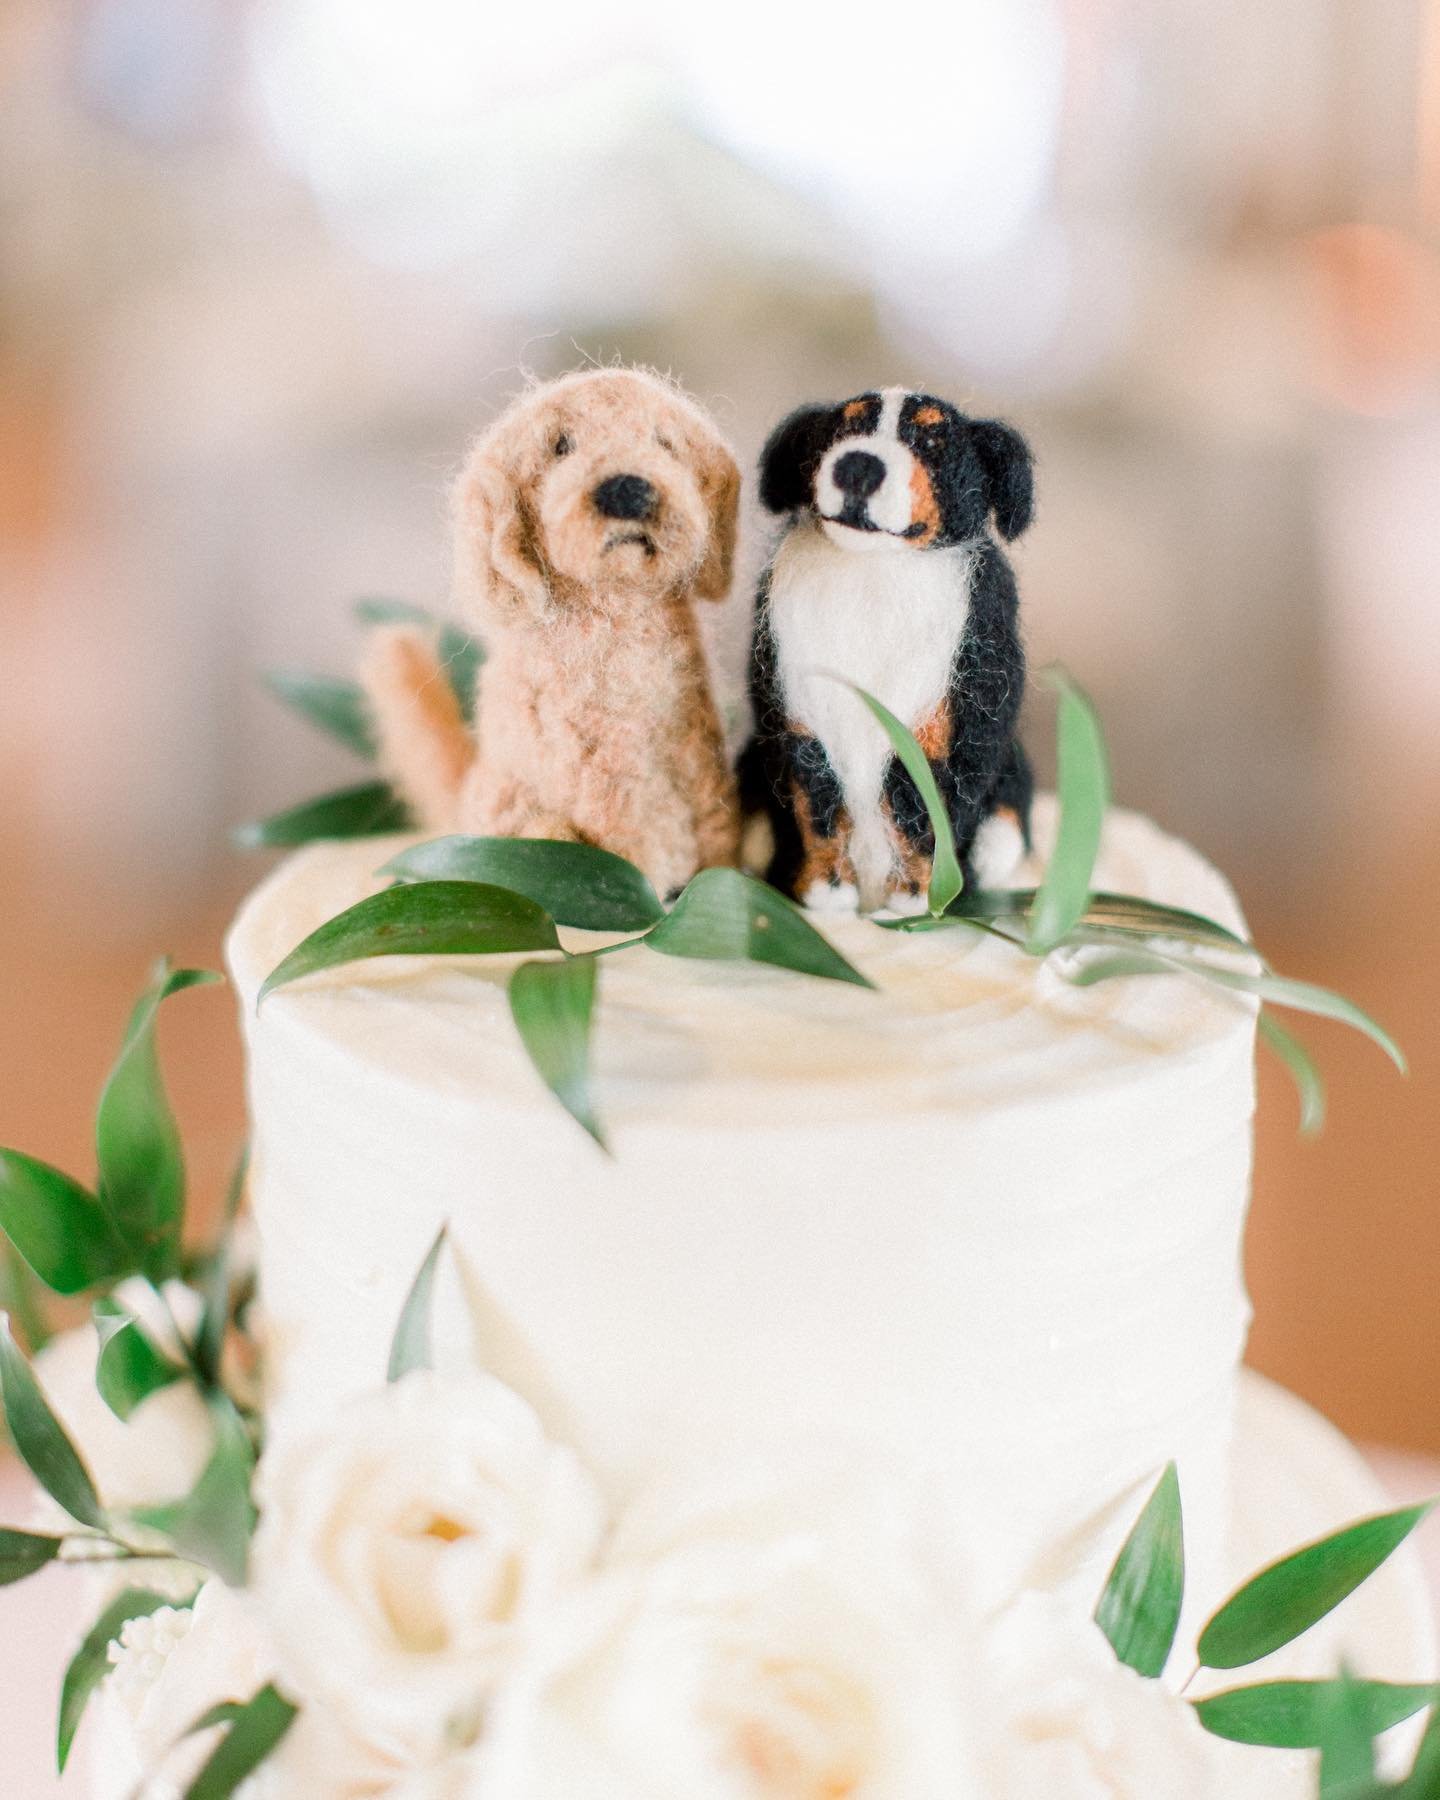 Did @kericbk nail this paw-fect wedding puppy cake topper or what?! 🐶🎂
👉🏻 Swipe to see these cuties in real life!
Artist Keri creates custom handmade needle felted pet creations and crochet items. And she isn't just limited to wedding cake topper